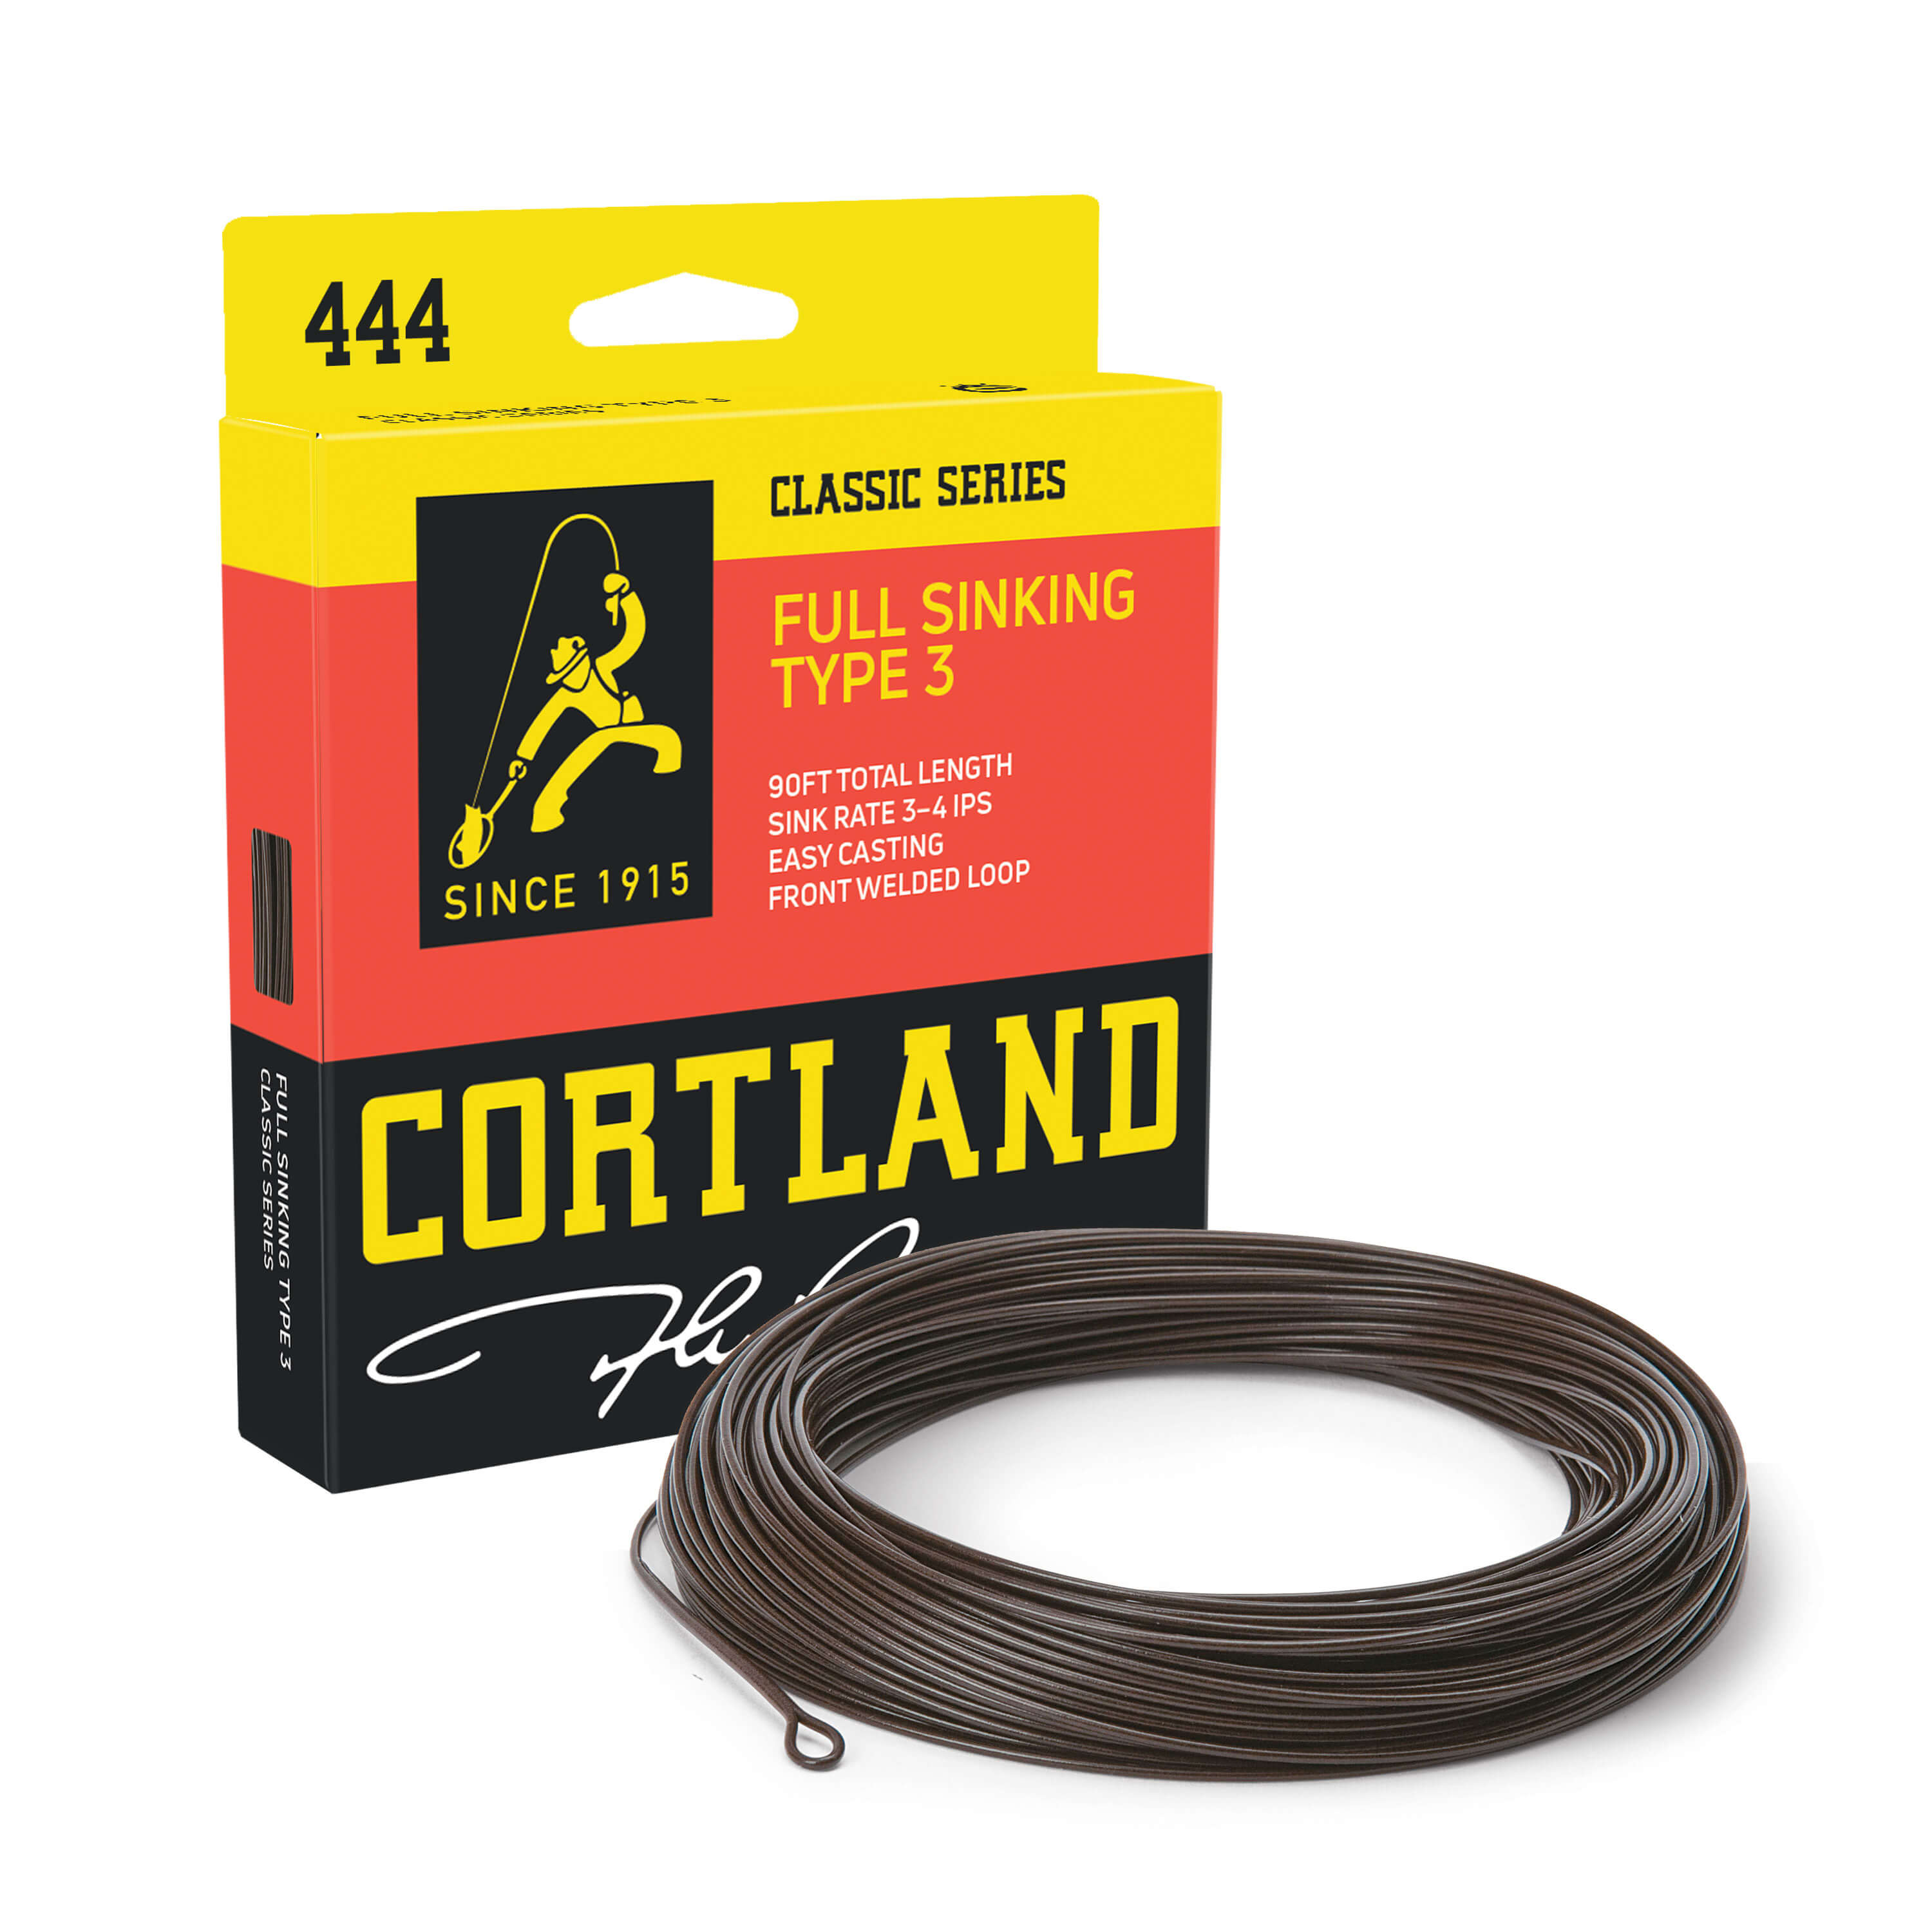 Cortland Full Sinking Type 3 444 Fly Line - Brown - WF7S